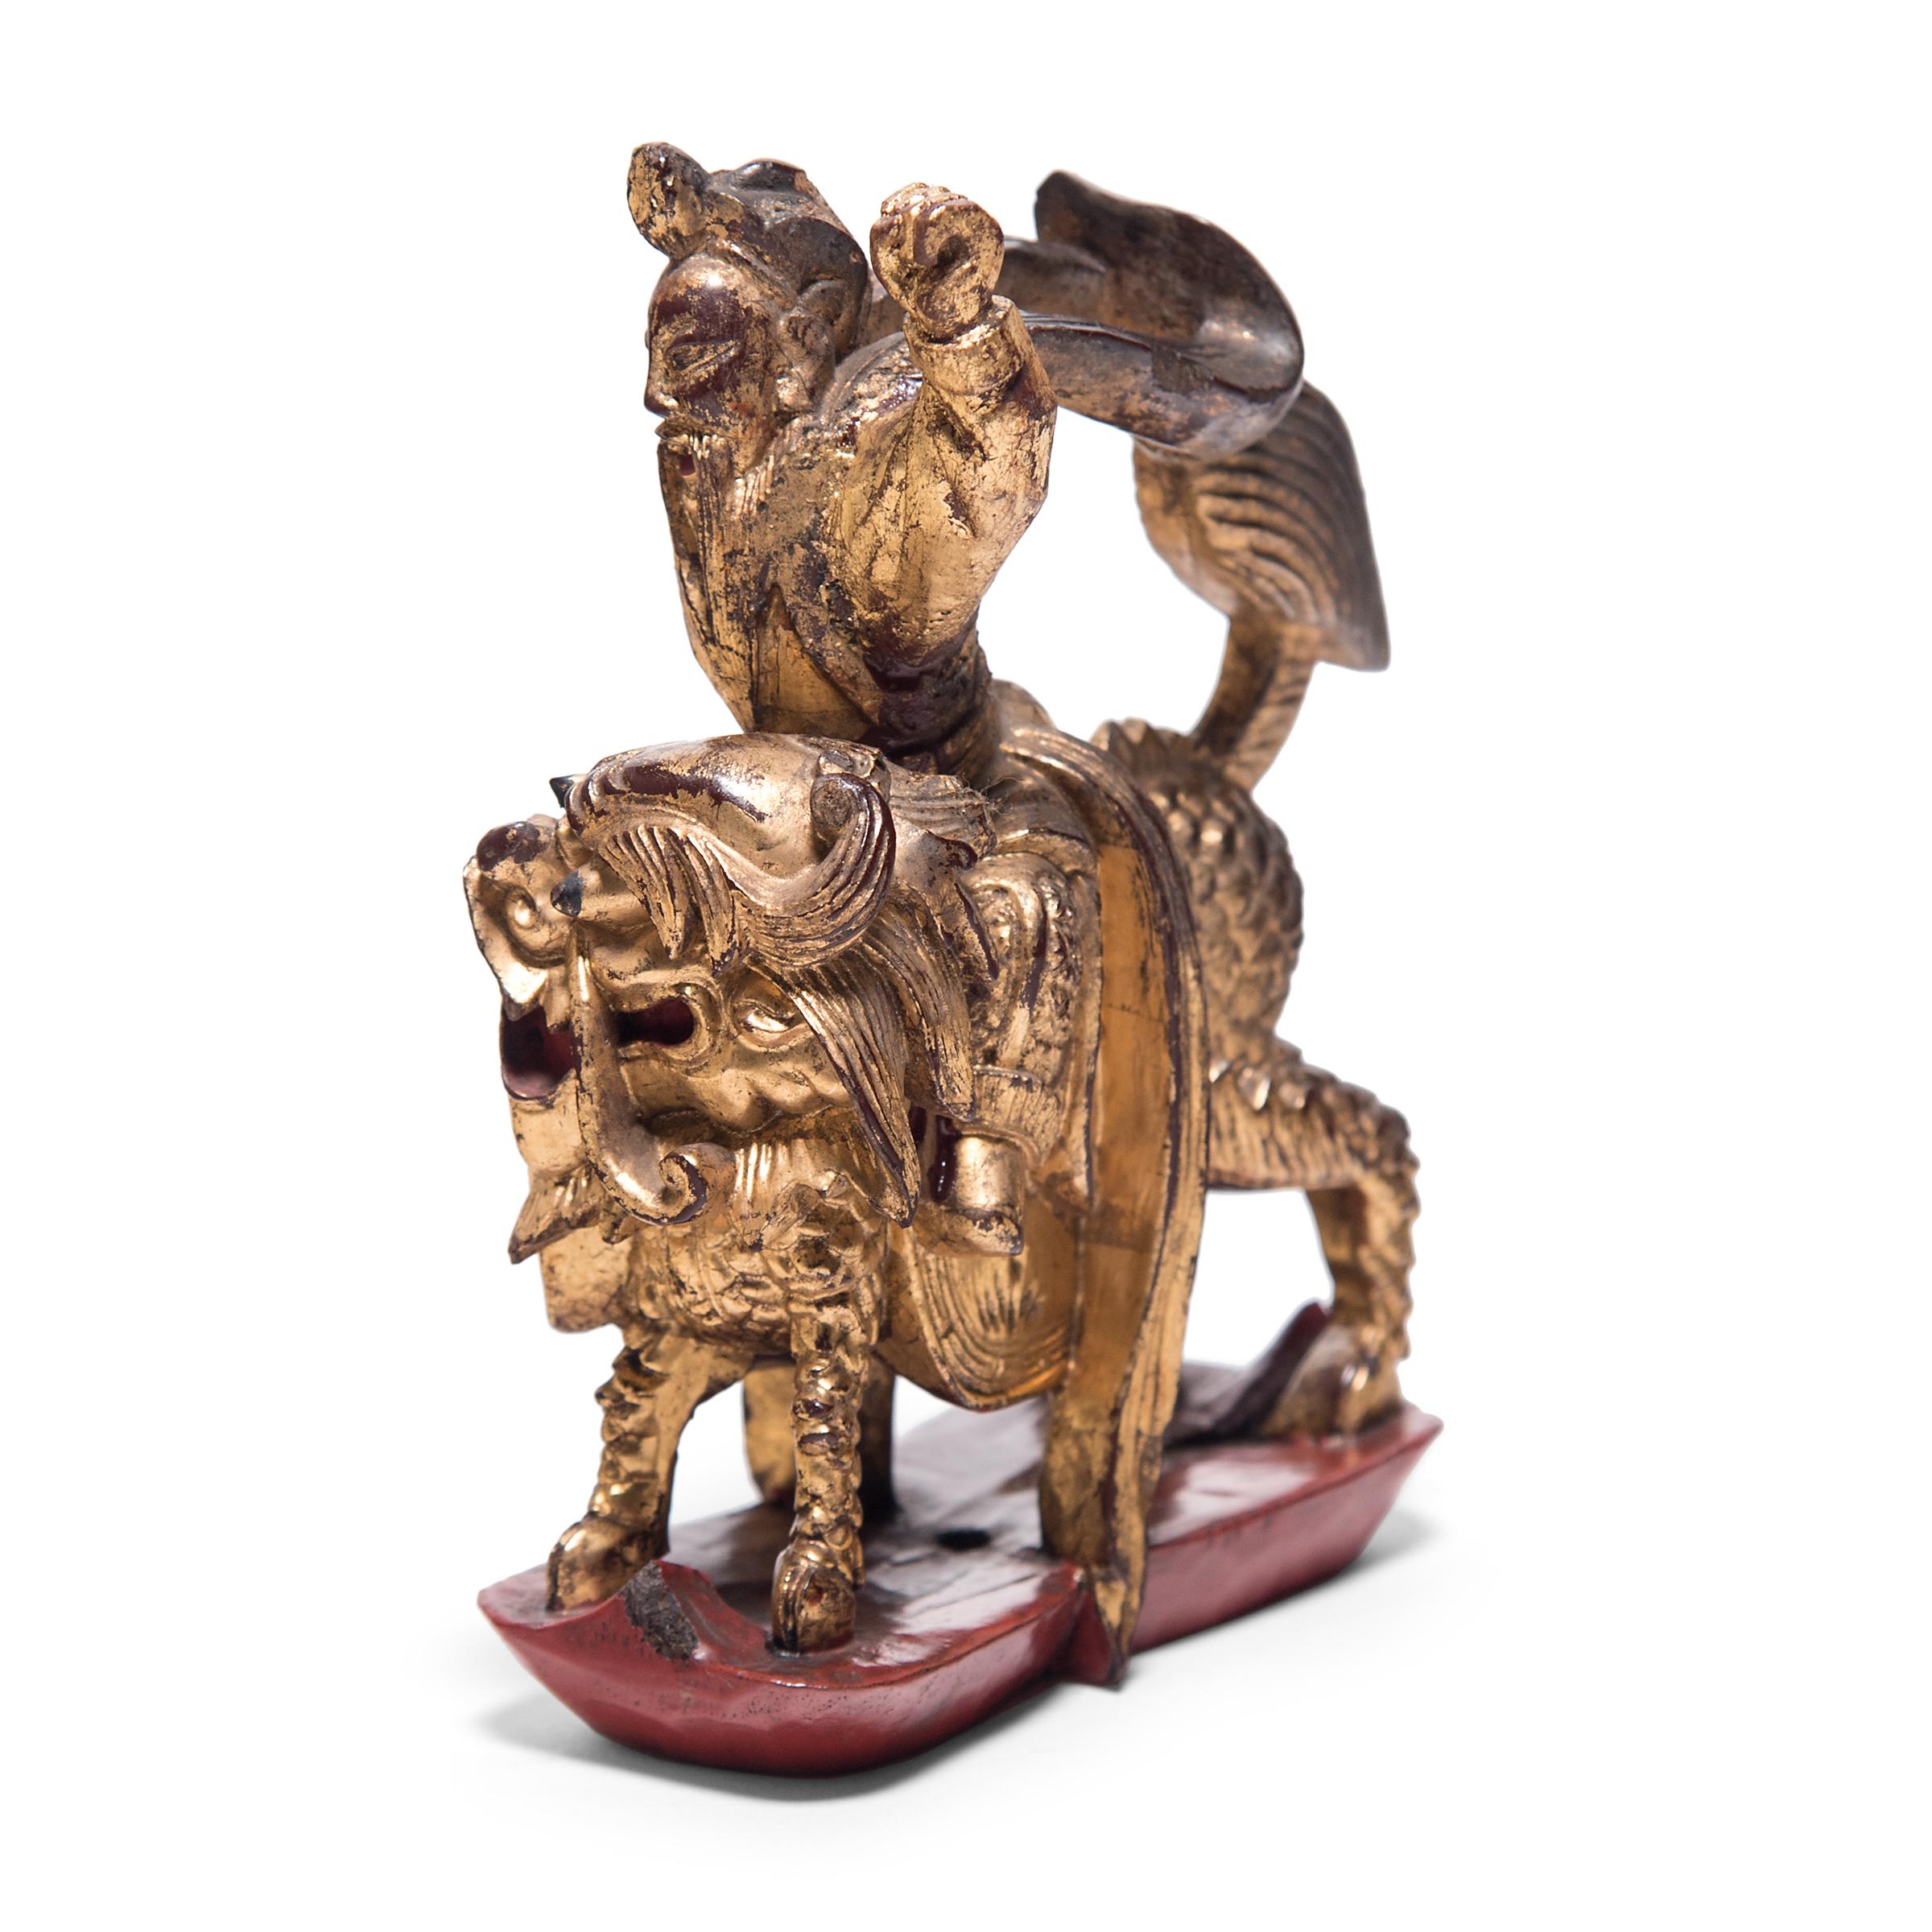 Lavishly pigmented and carved with intricate detail, this petite mythical figurine was originally a decorative element from an ornate 19th century bed surround. Riding a mythical qilin into battle, the figure depicts one of the hundreds of